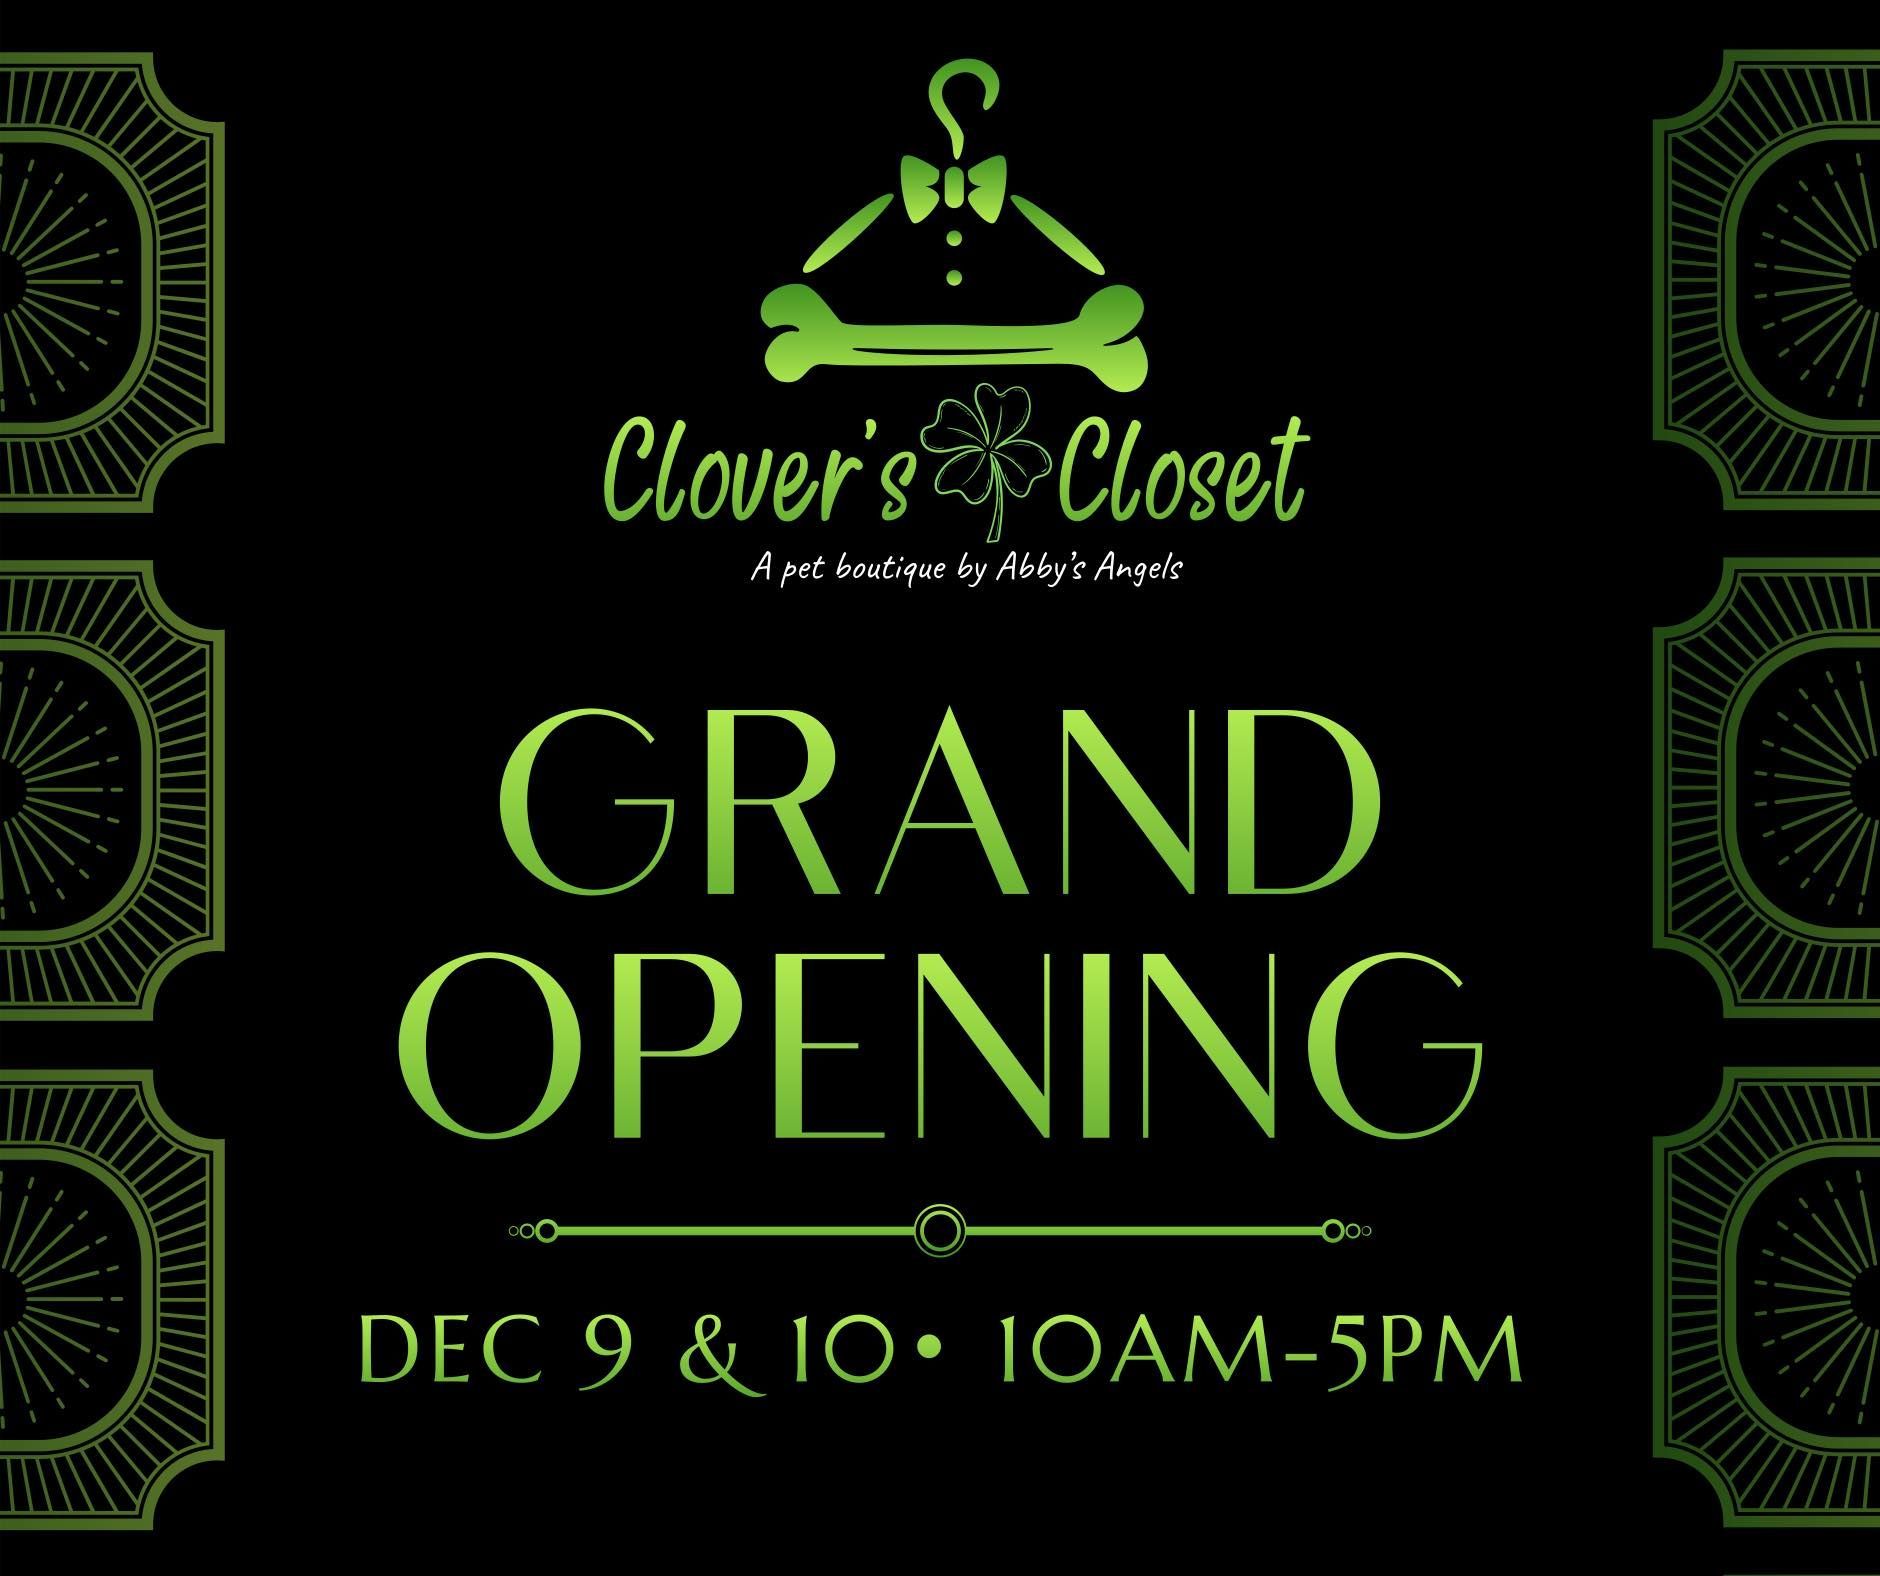 Clovers Closet is located at 114 W Pitt St Bedford, PA 15522